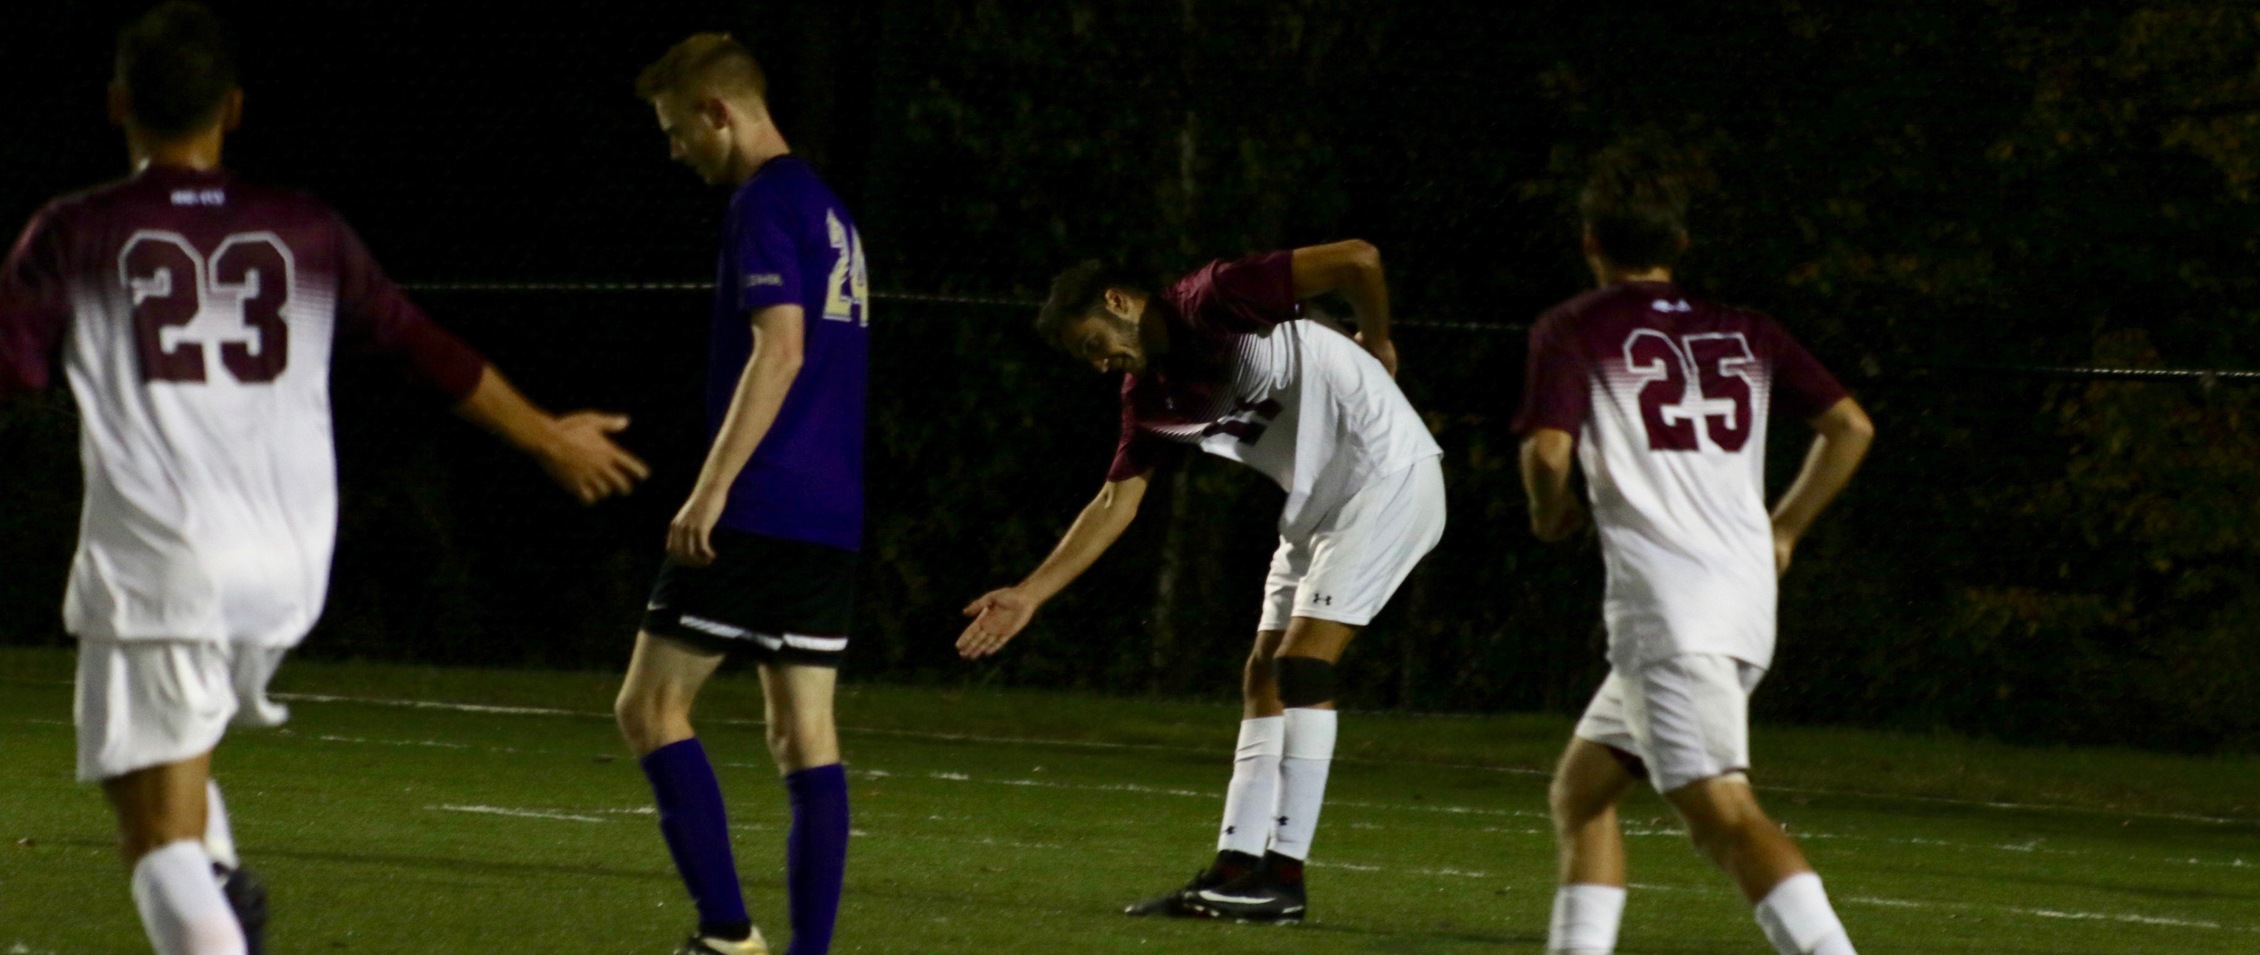 Men’s Soccer Snaps Winless Drought with 4-1 Victory Versus Saint Michael’s